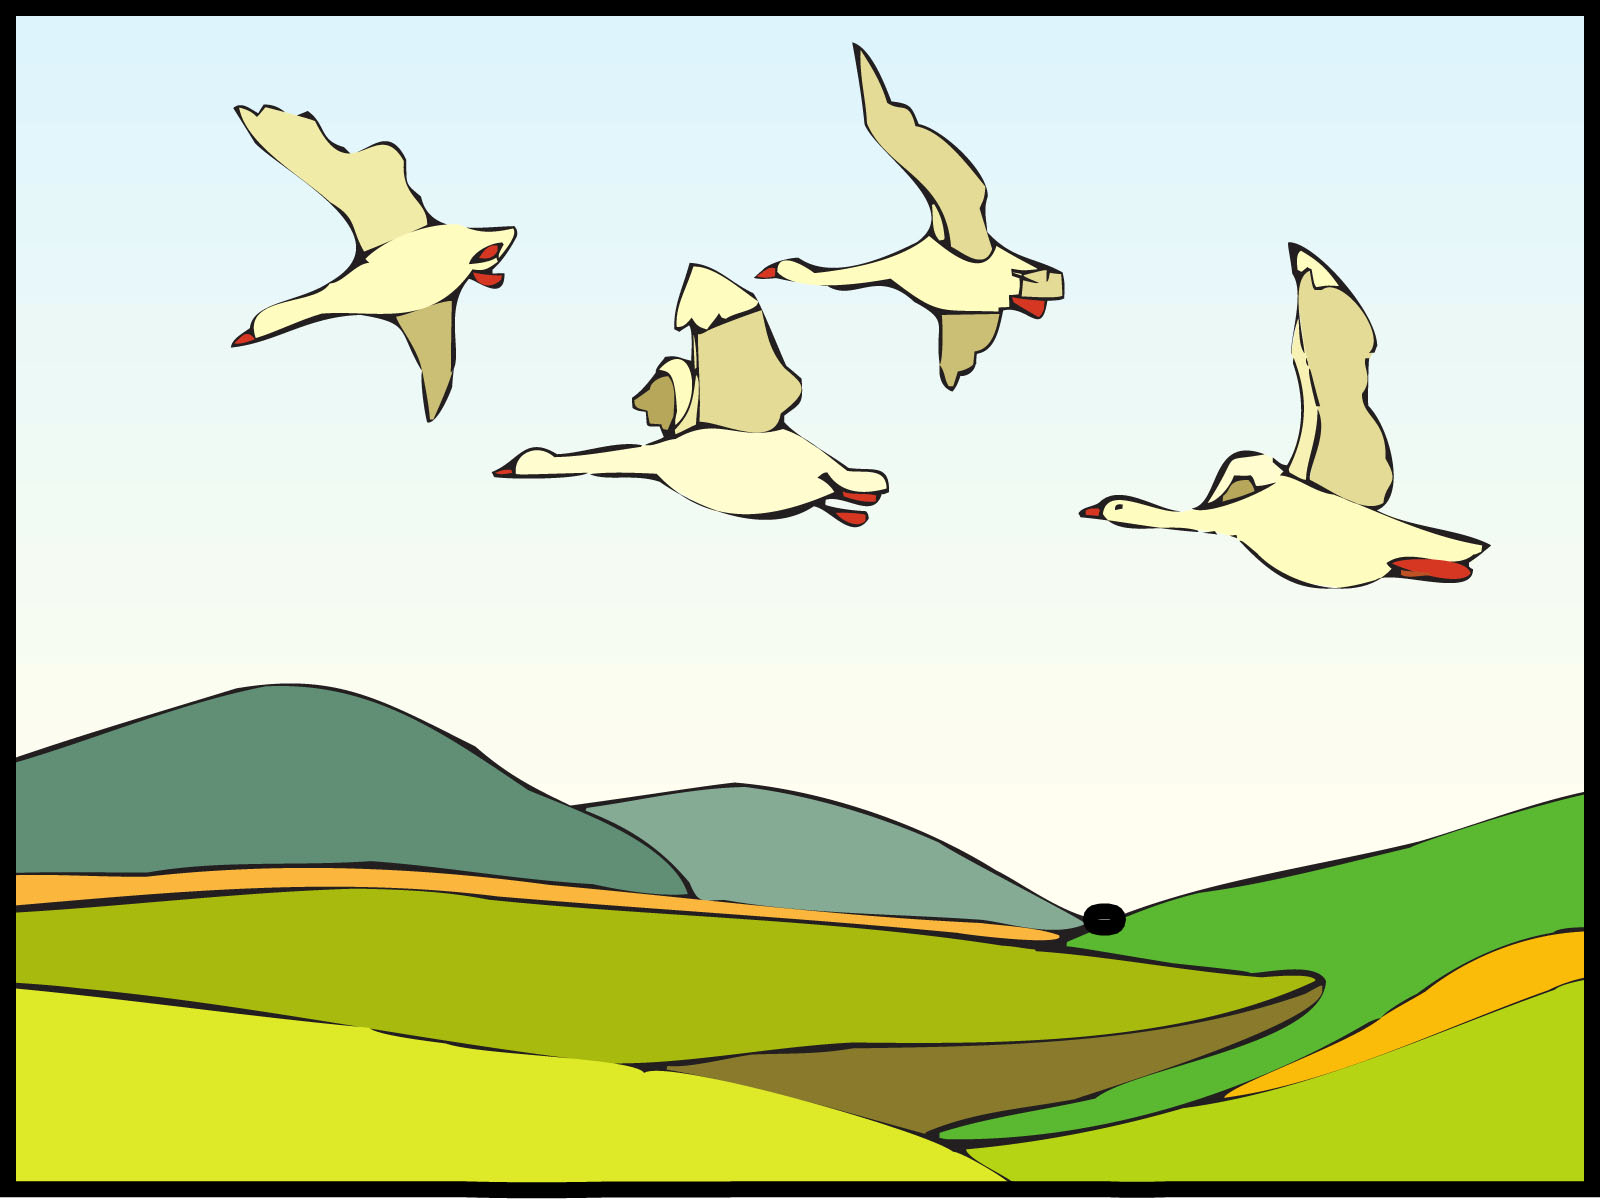 Geese Flying Over Landscape Backgrounds | Animals, Nature Templates | Free  PPT Grounds